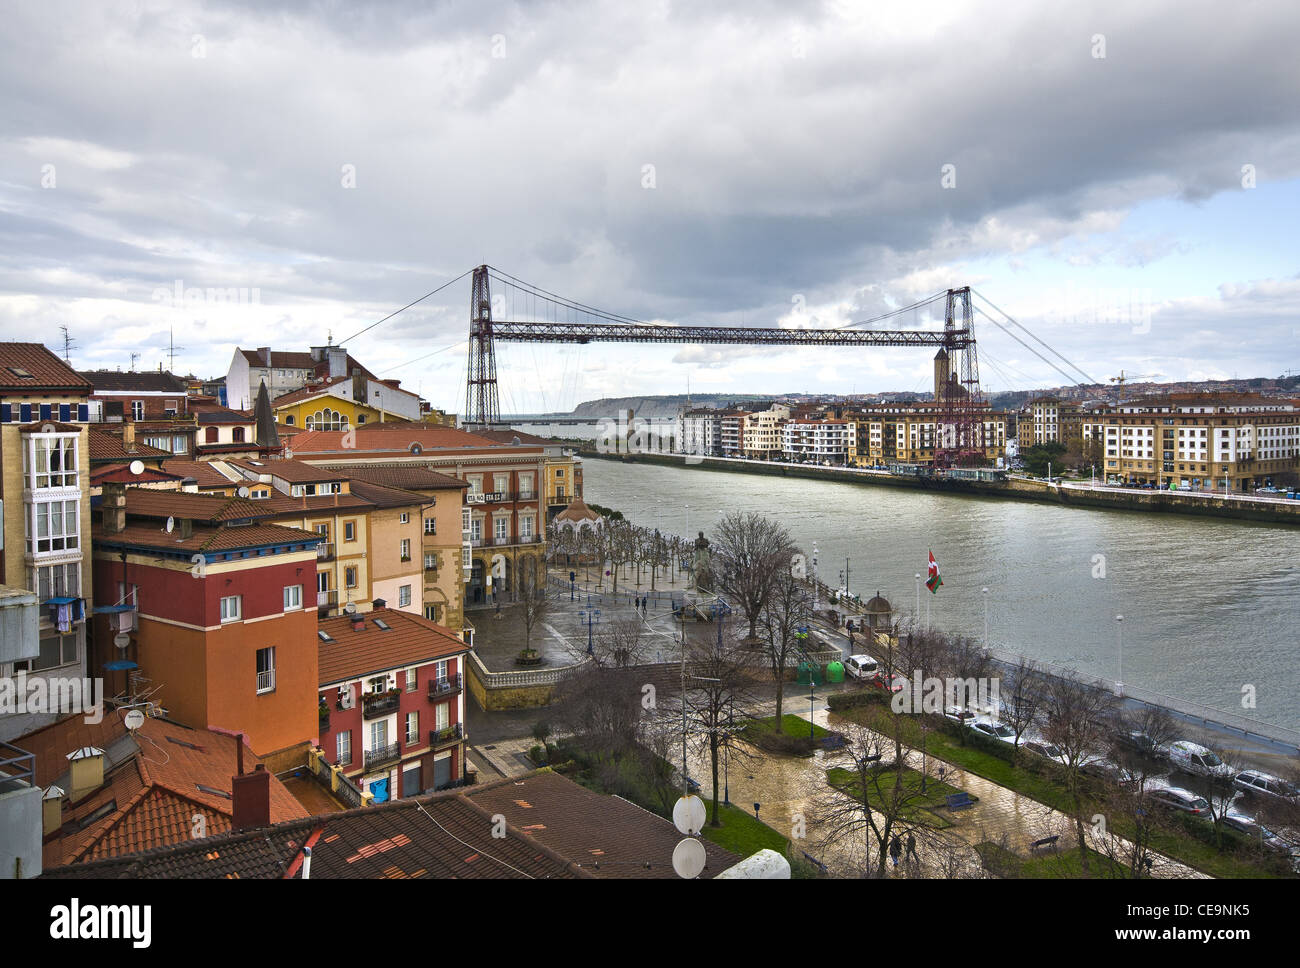 The Vizcaya Bridge that links Portugalete and Las Arenas in the Biscay province of Spain, crossing the Nervion River Stock Photo